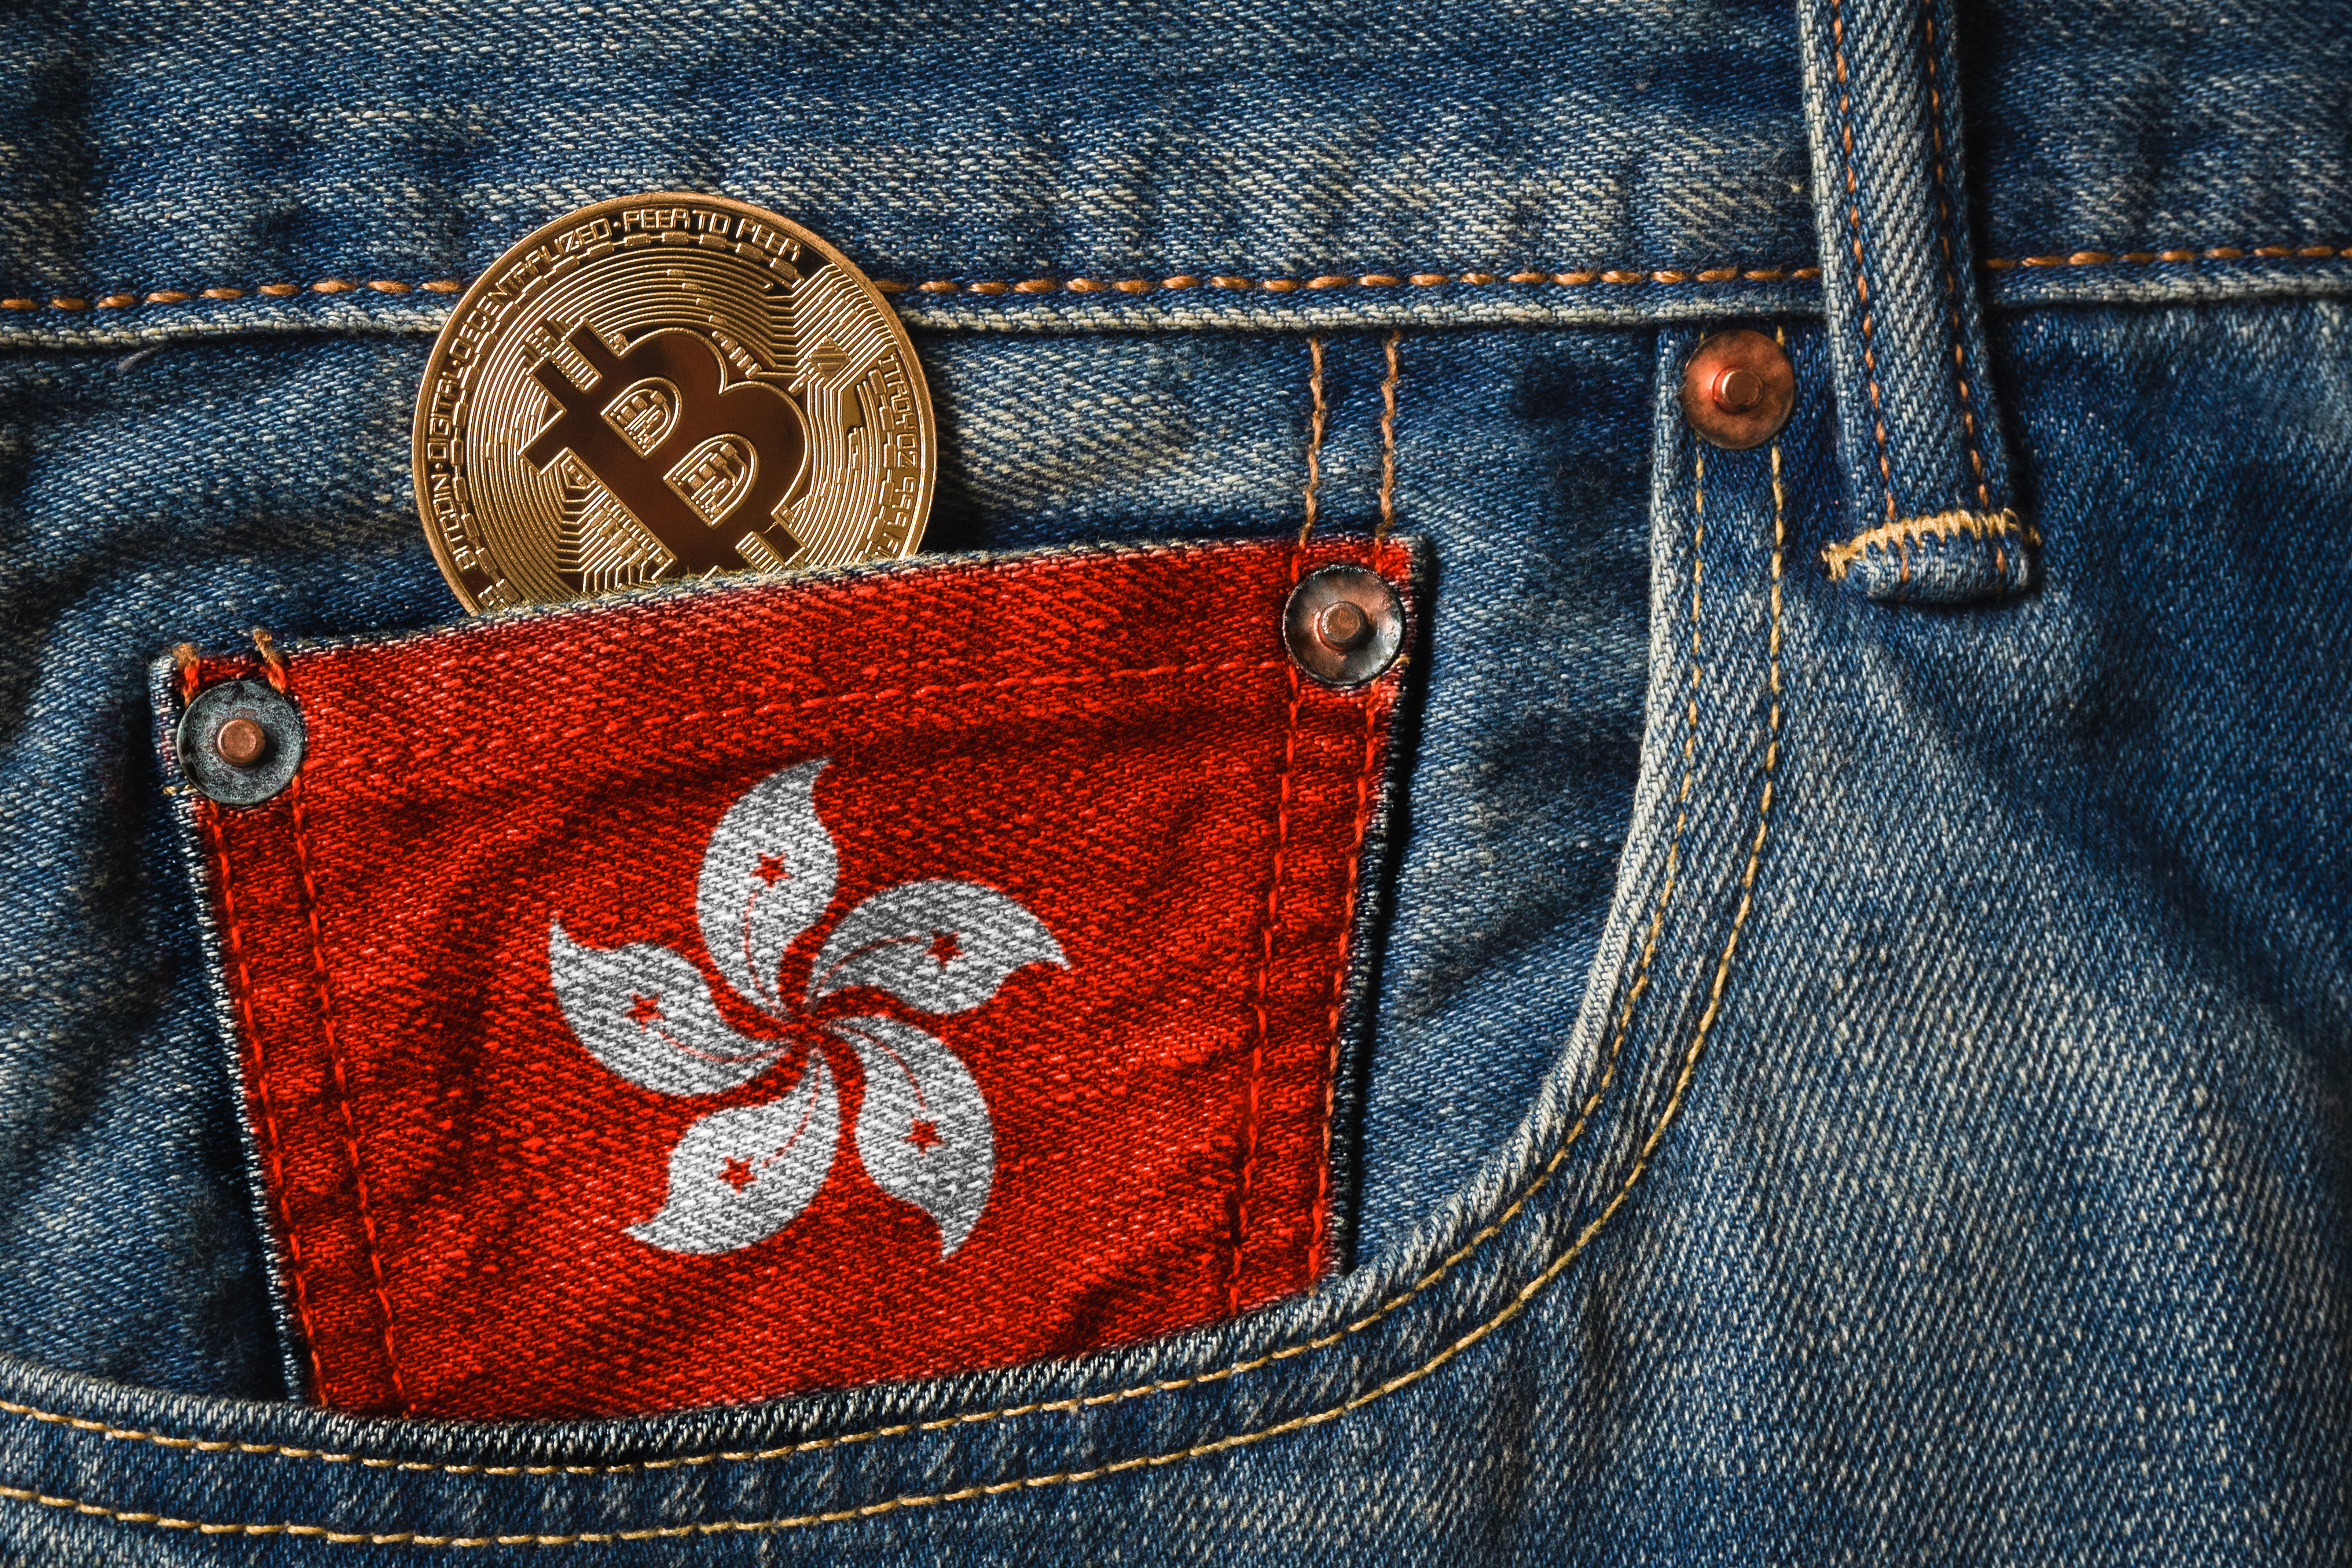 Licensed cryptocurrency exchanges in Hong Kong will start taking retail traders in the second half of this year, according to the Securities and Futures Commission. Photo: Shutterstock